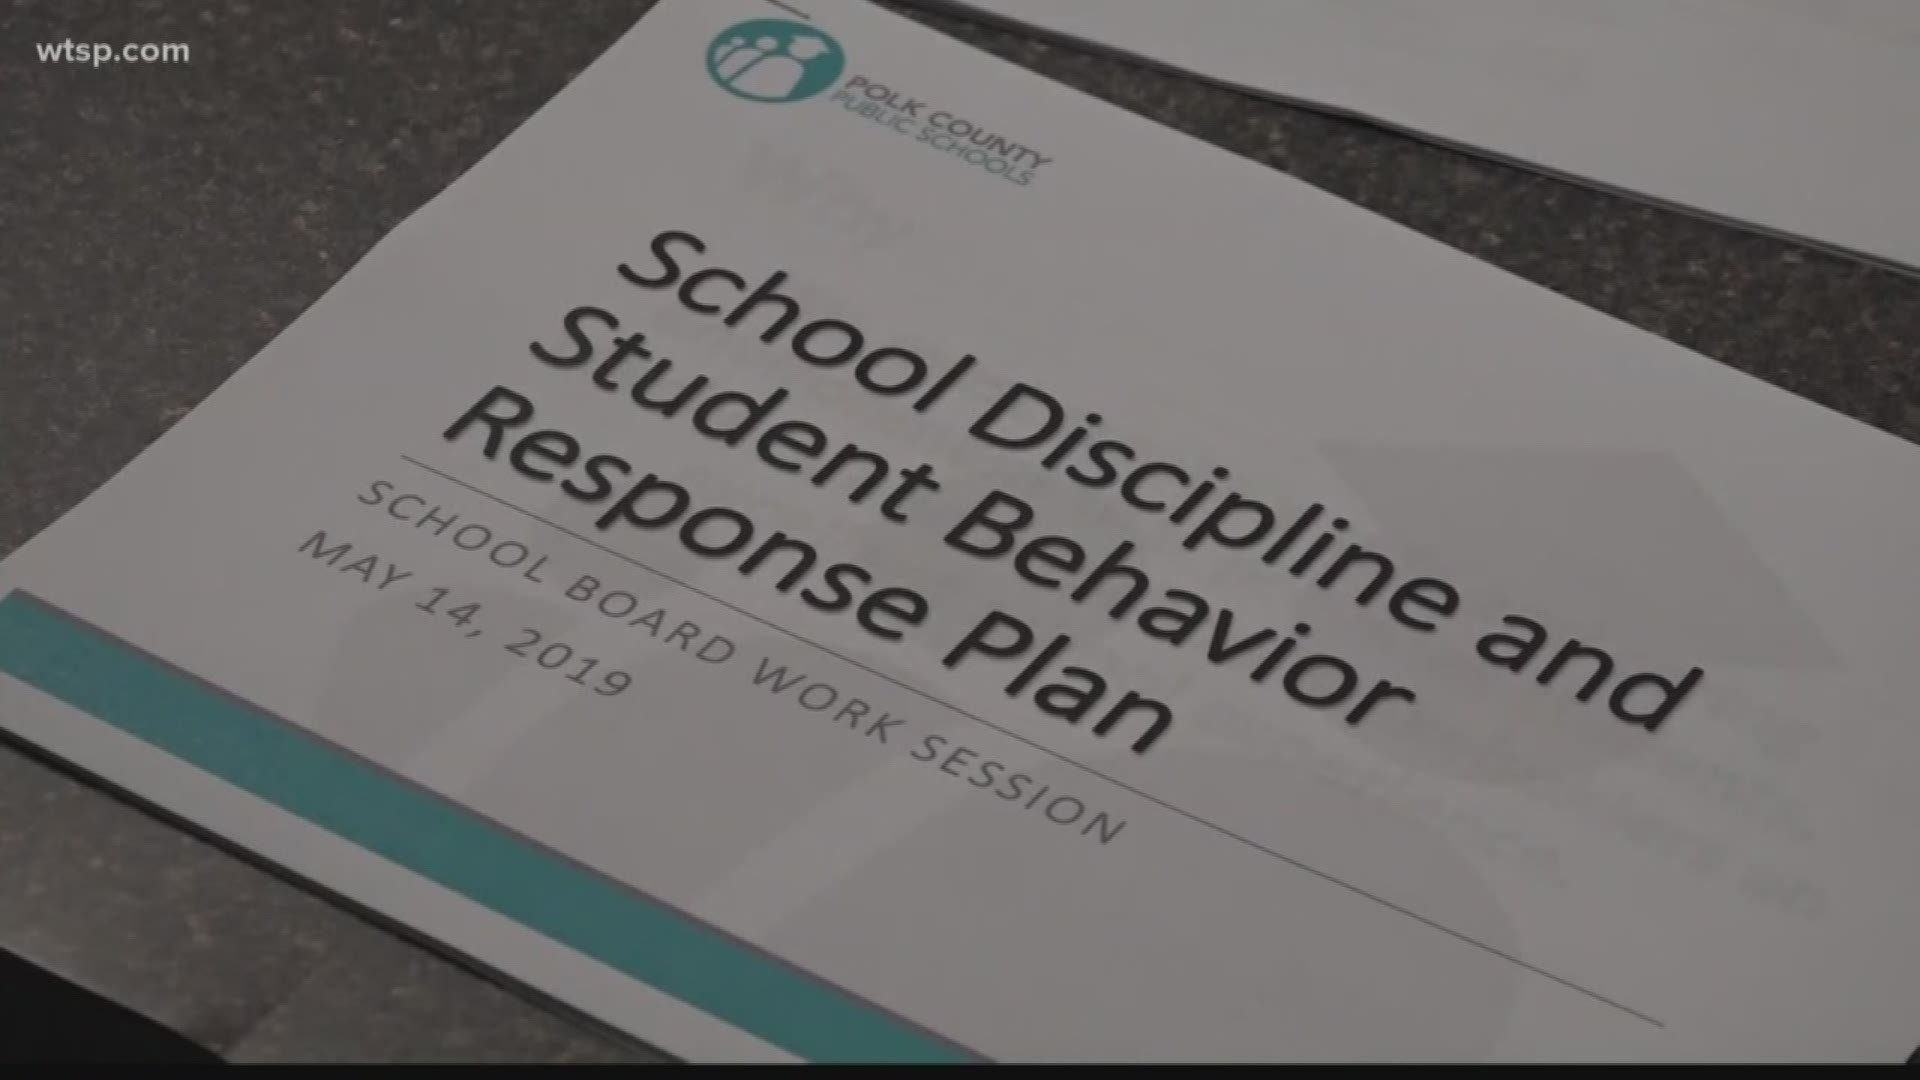 Bullying is not on the Tuesday agenda for Polk County schools, but there are parents who say they are going to make sure it's discussed anyway.